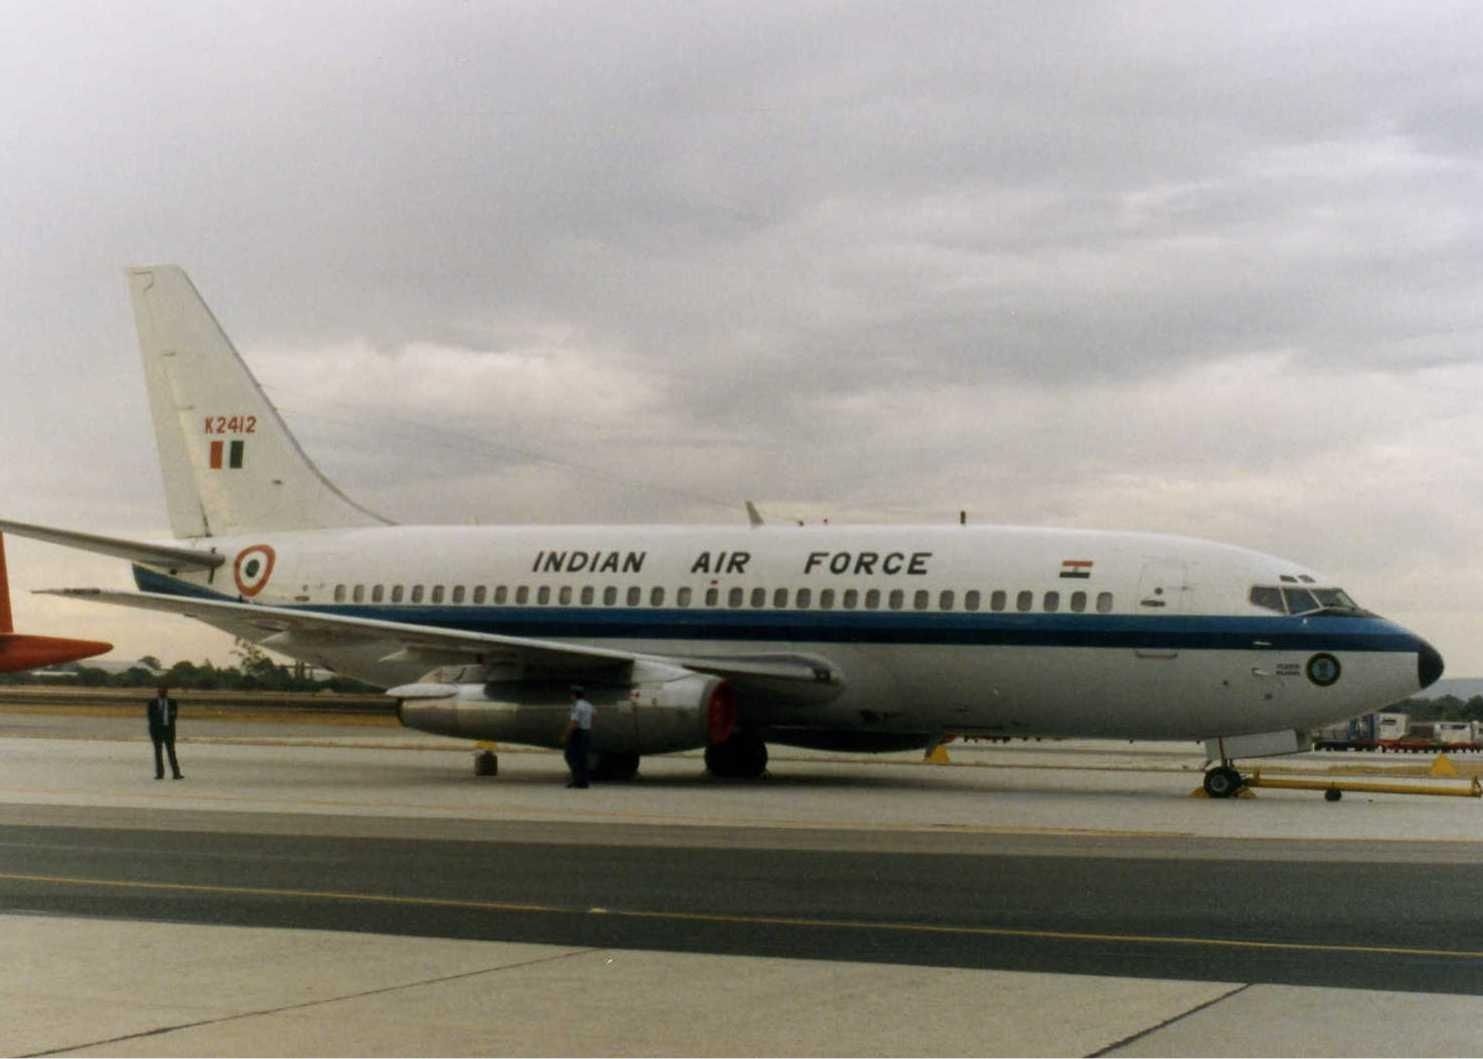 Indian Air Force Boeing 737-200 In Perth